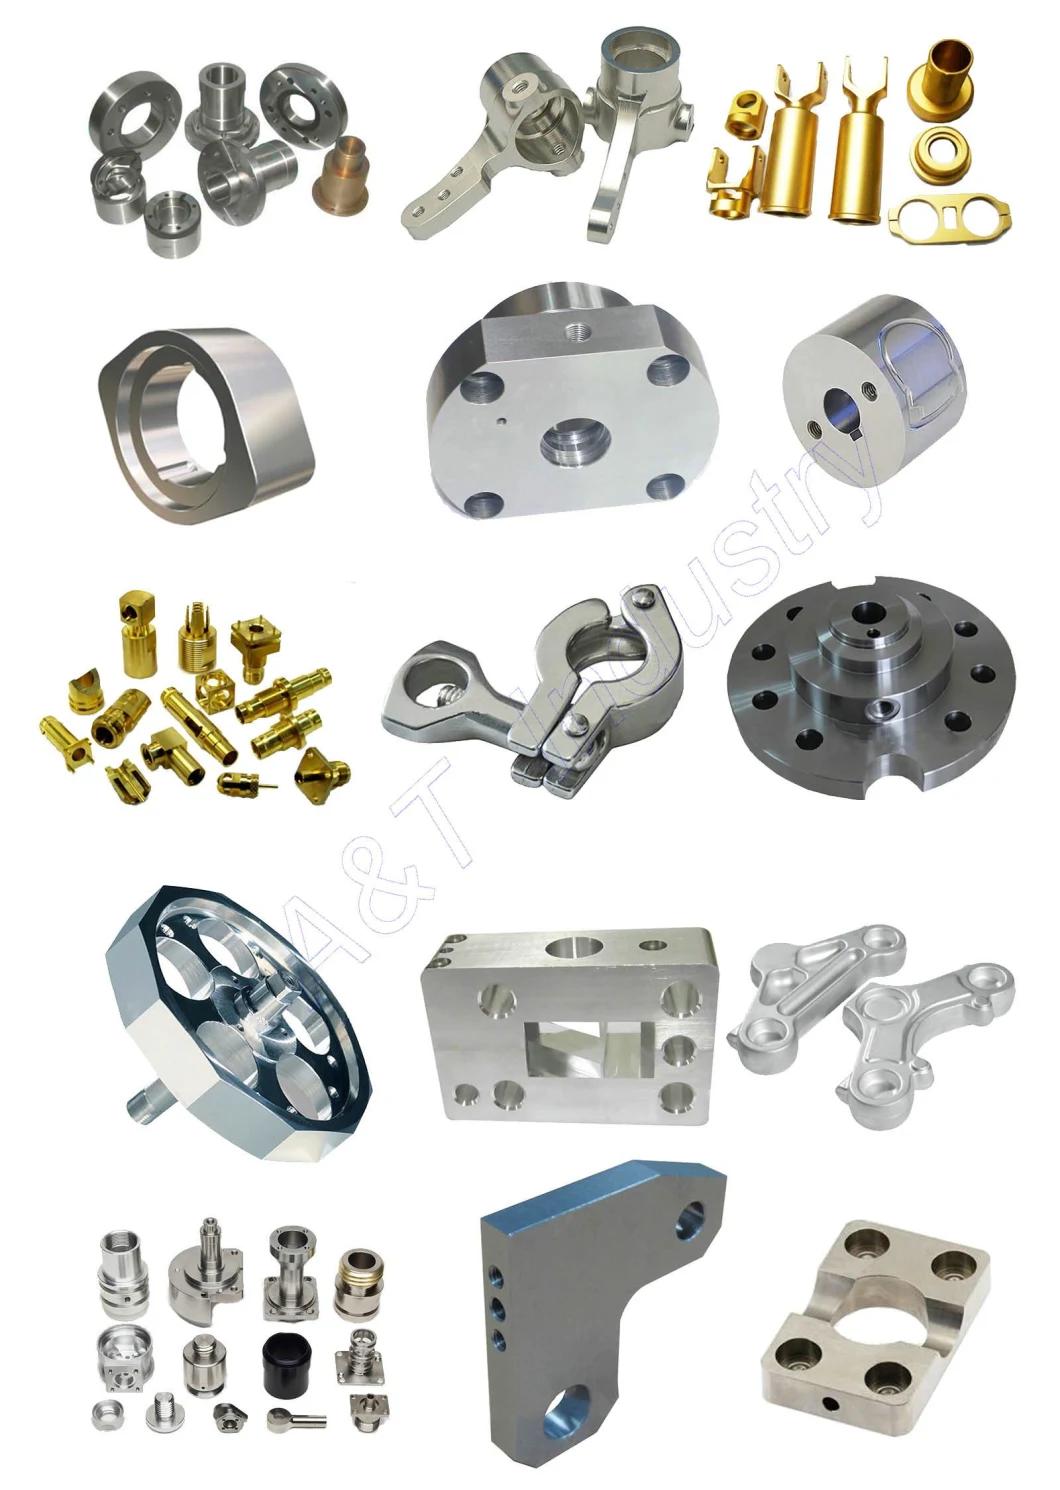 Motor Parts Auto Parts Die Casting Part for Motor